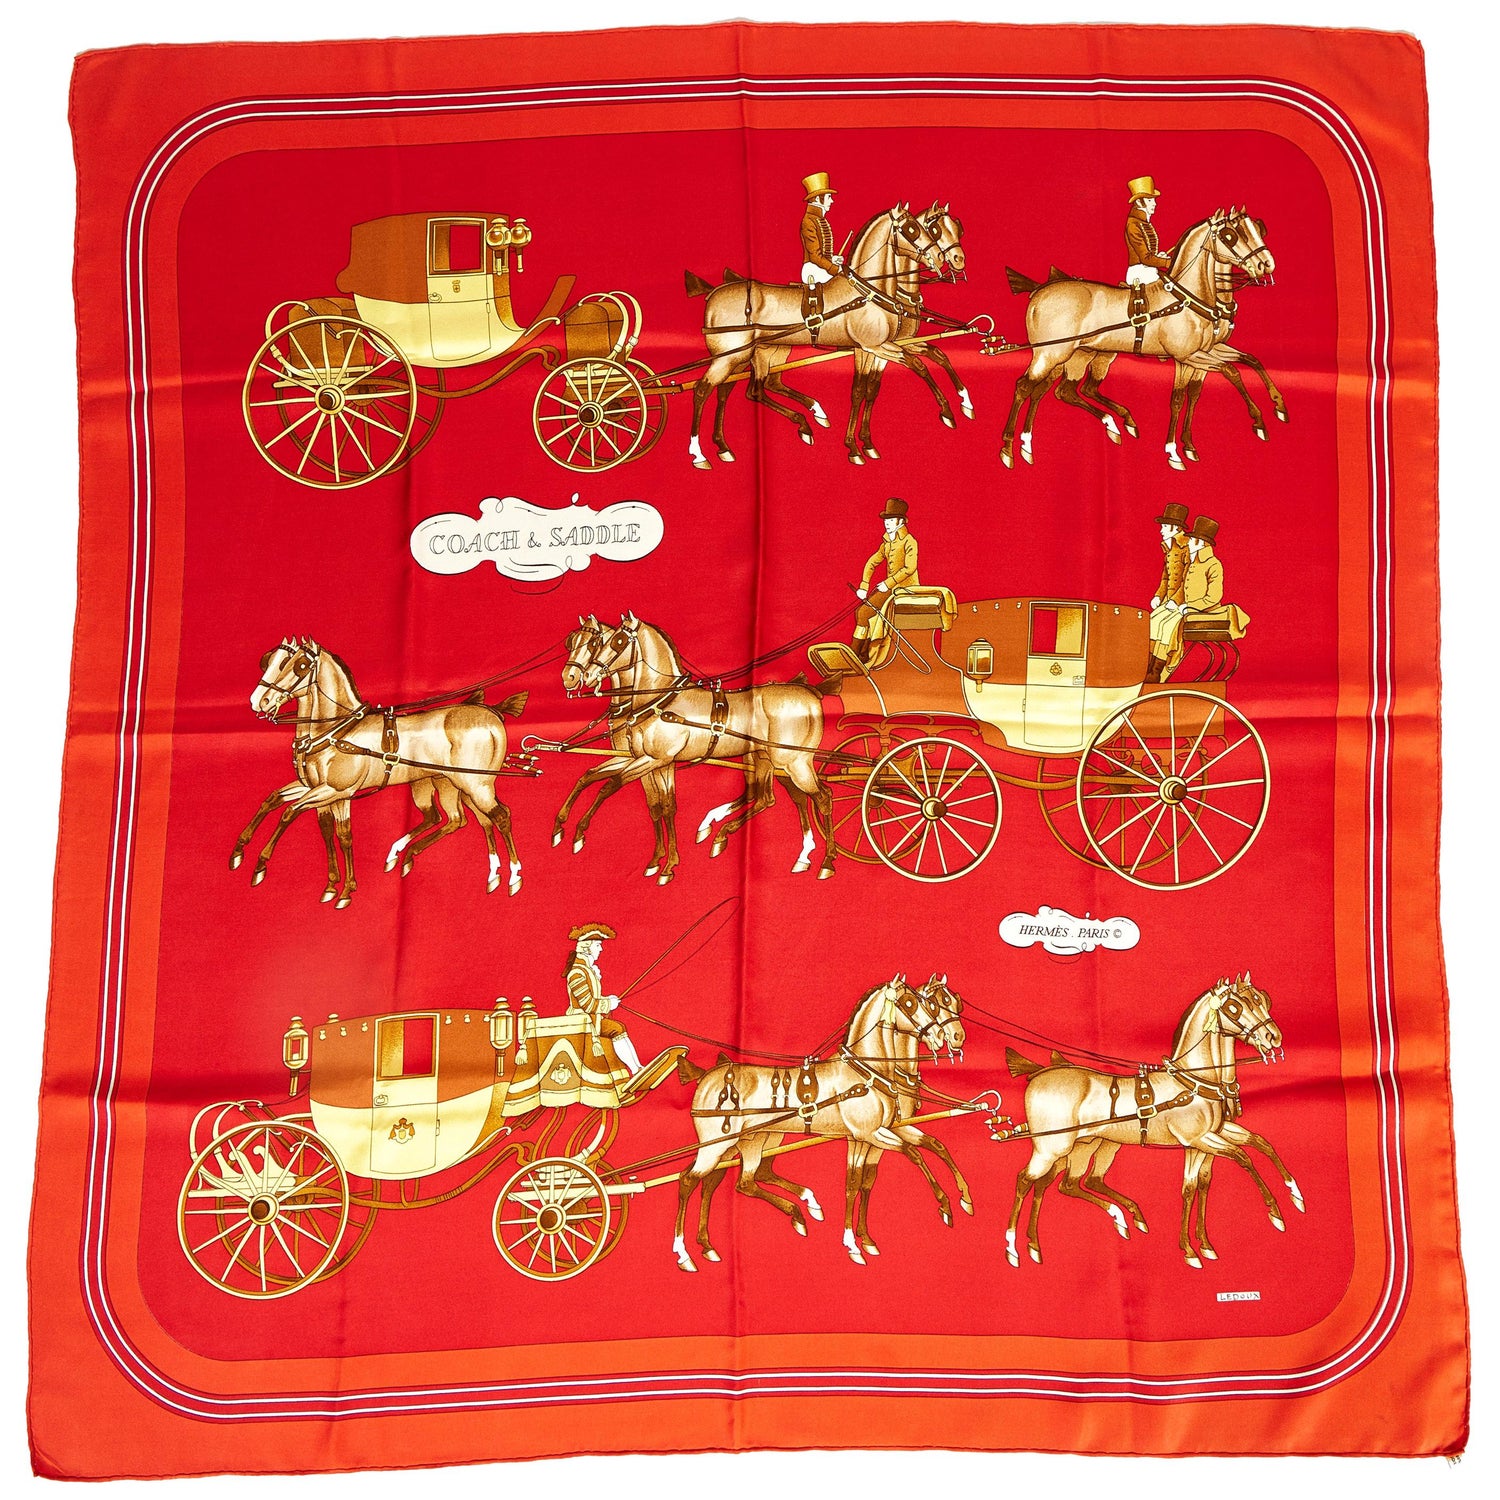 Authentic Hermes 100% Silk Scarf Coach & Saddle Red Philippe 